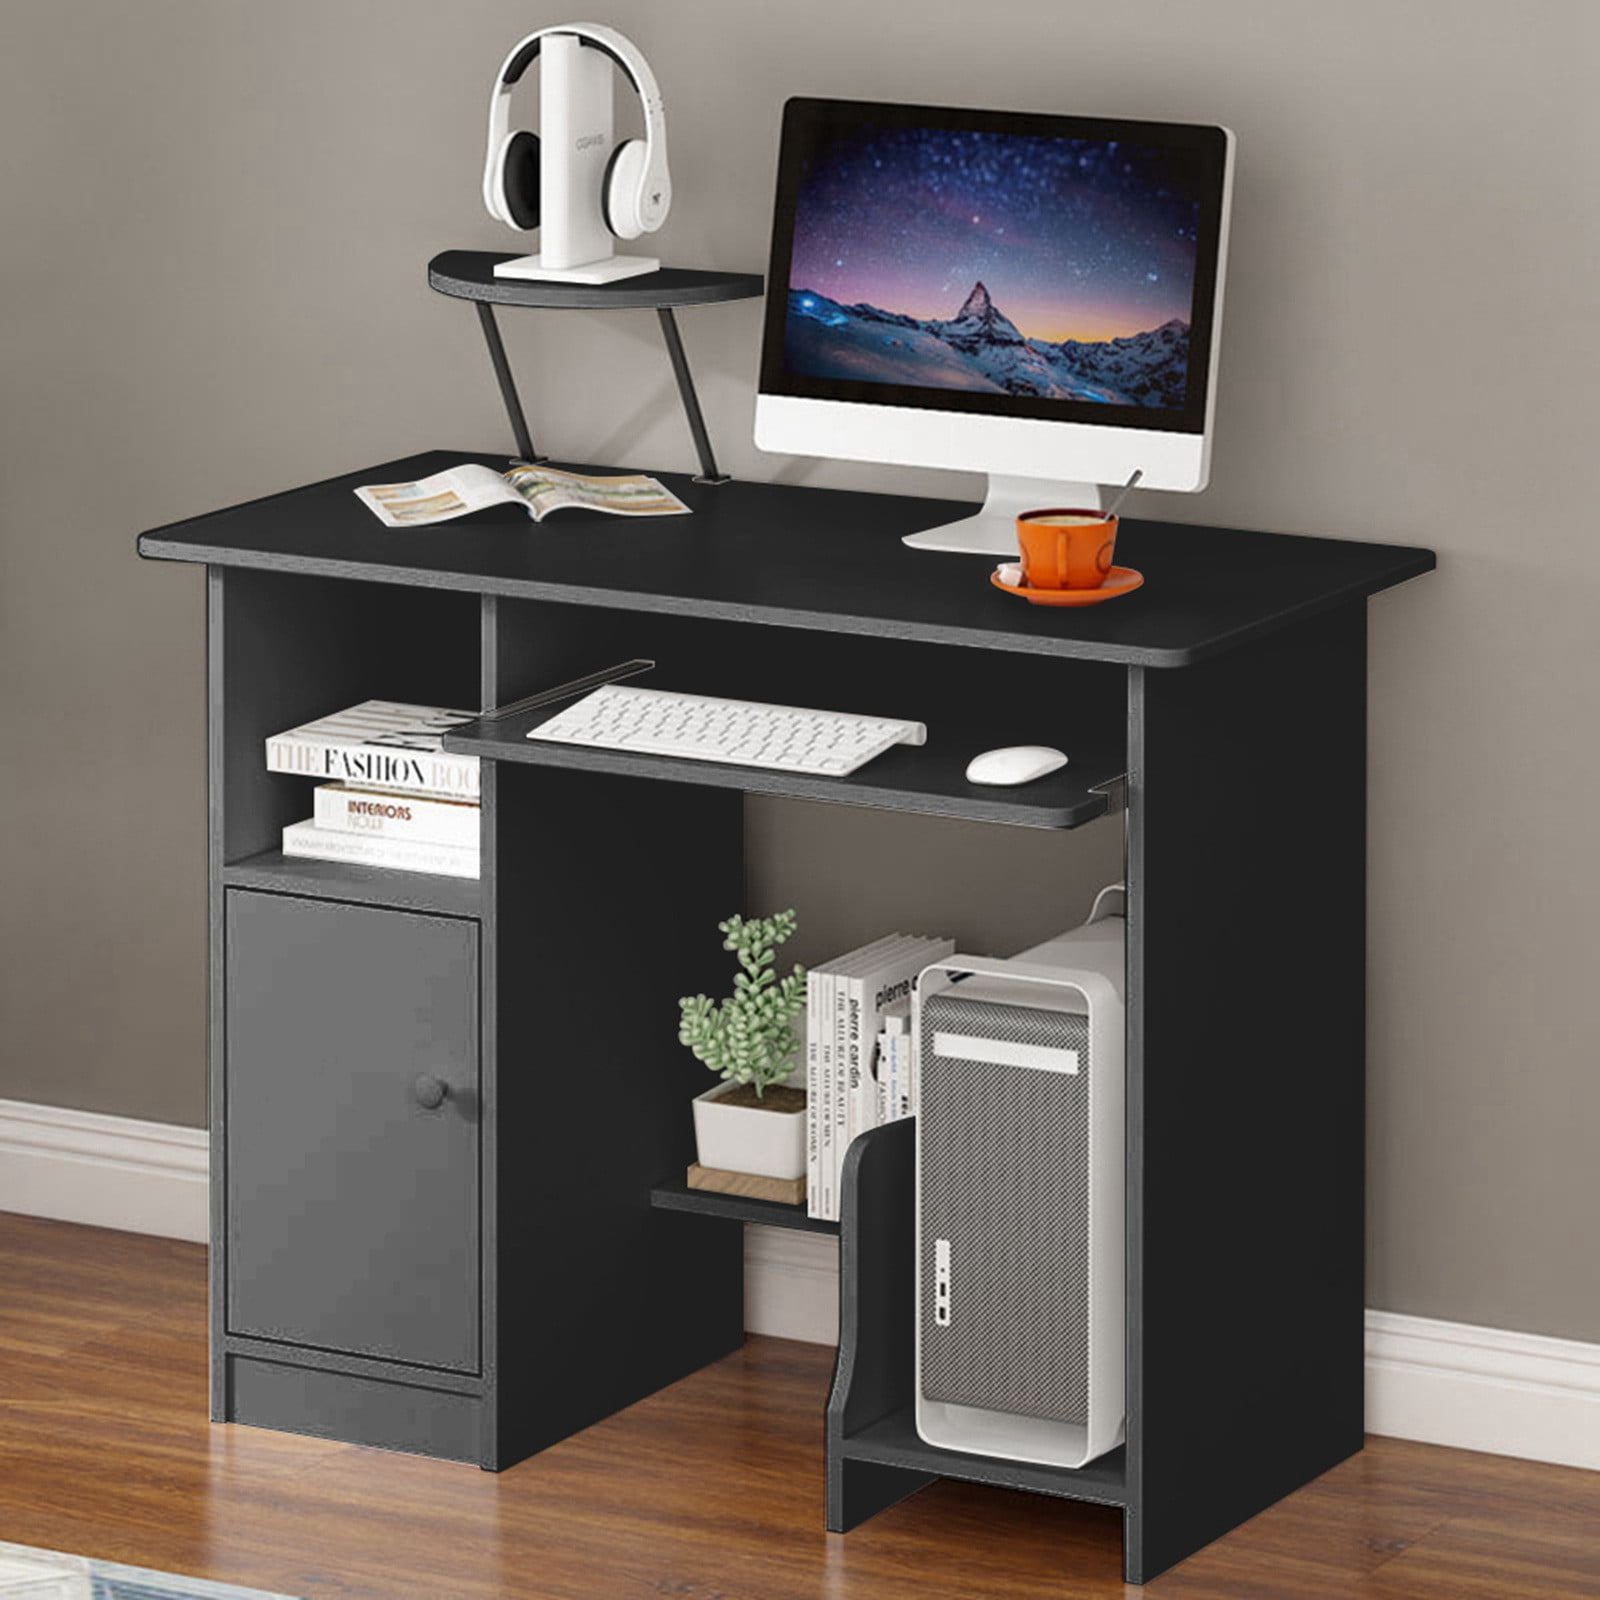 Home Desktop Computer Desk With lockers Home Small Desk Dormitory Study Table 